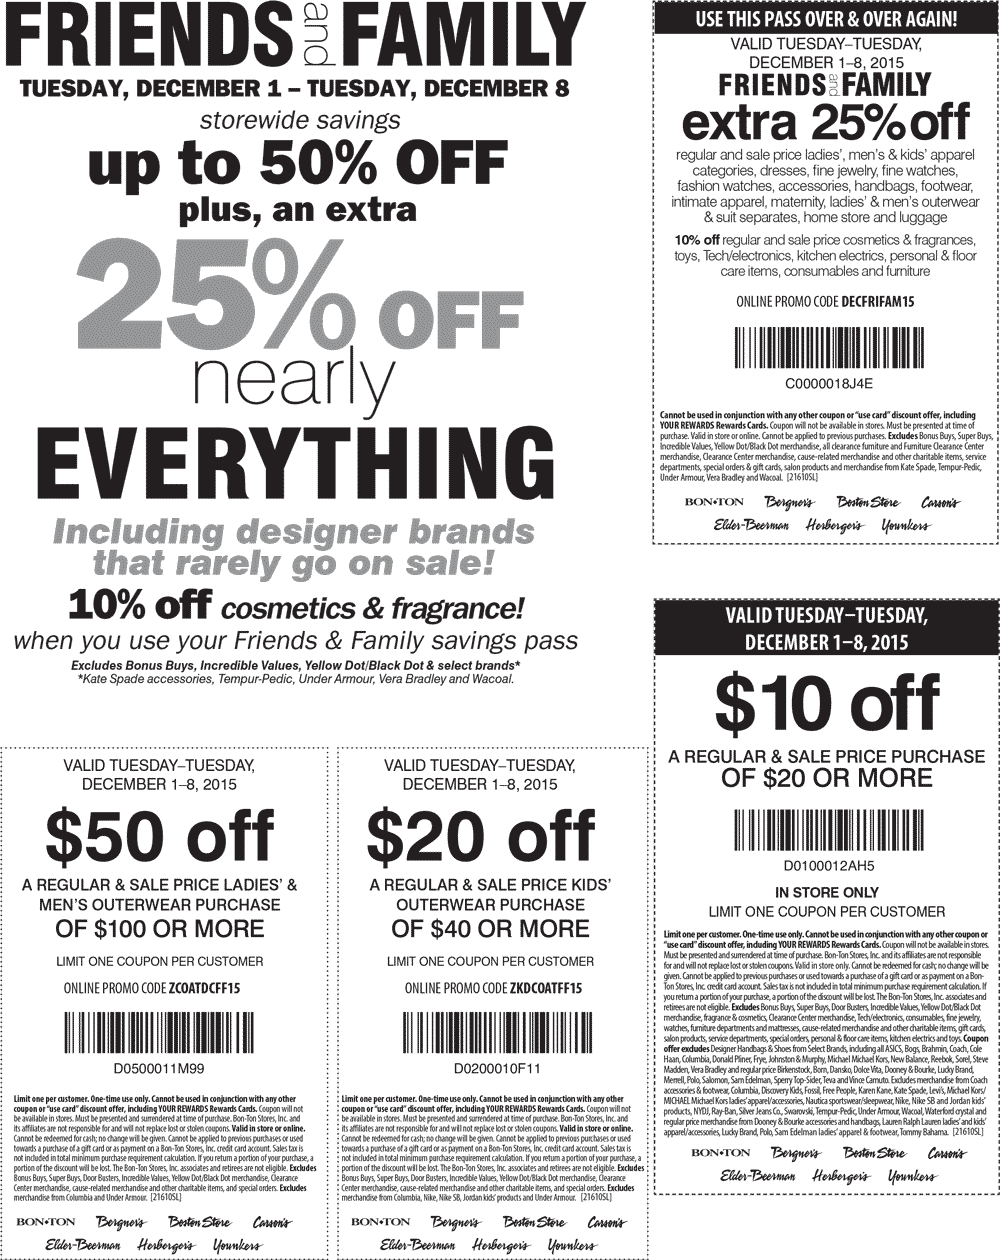 Carsons Coupon April 2024 Extra 25% off & more at Bon Ton, Carsons & sister stores, or online via promo code DECFRIFAM15